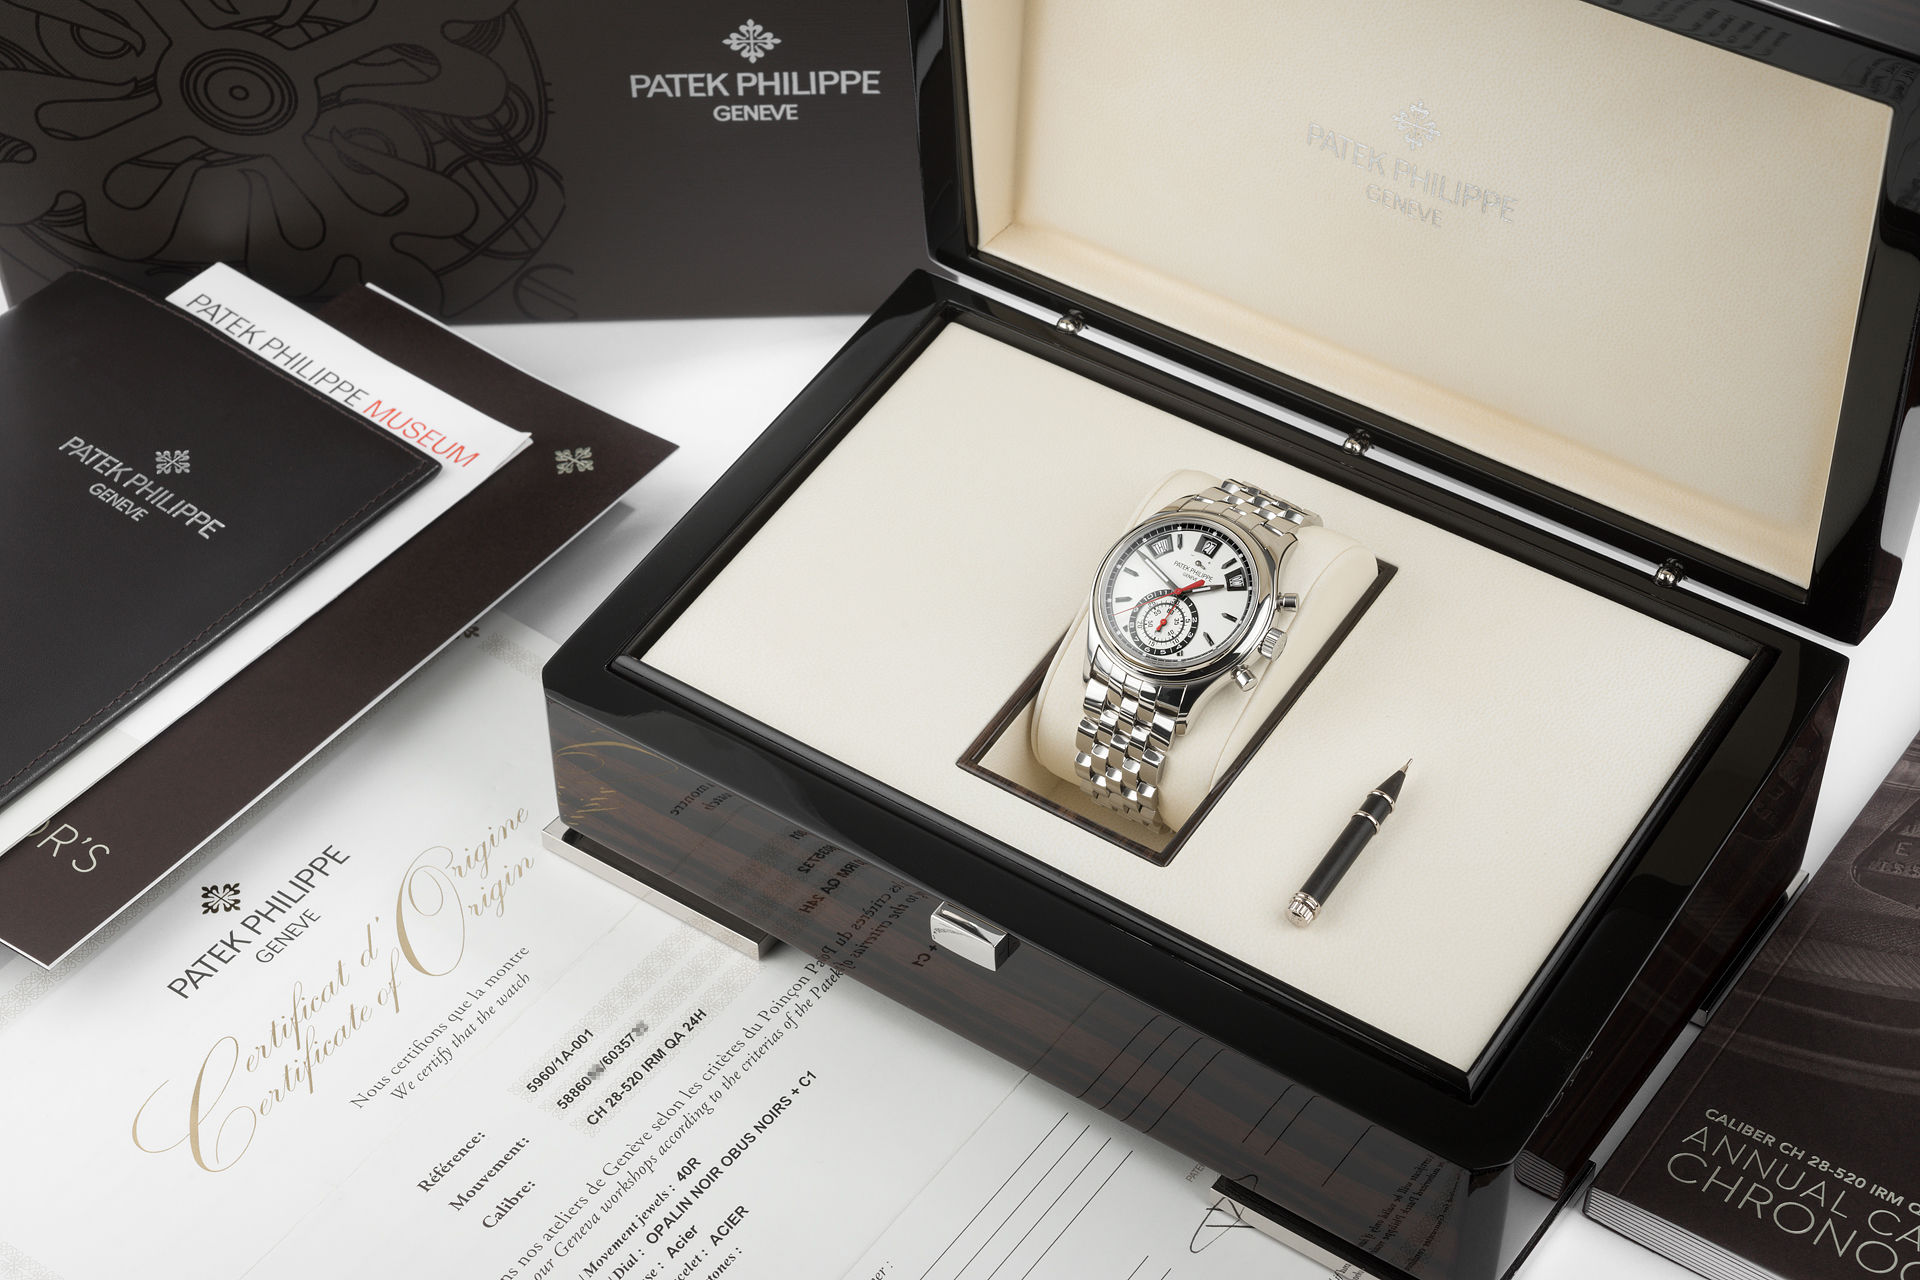 ref 5960/1A-001 | Stainless Steel Complete Set | Patek Philippe Annual Calendar Chronograph